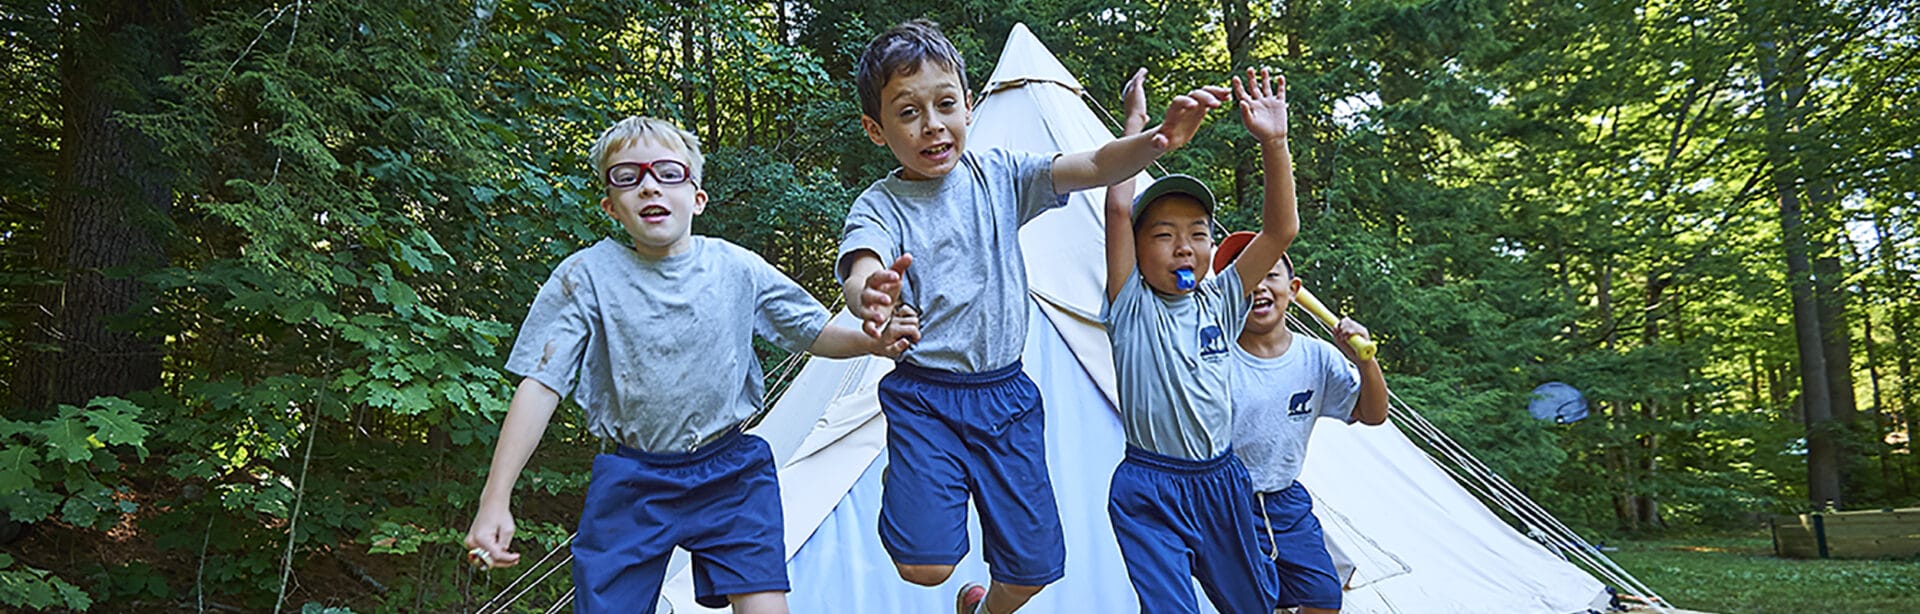 Summer camp for boys age 7-9 in New Hampshire